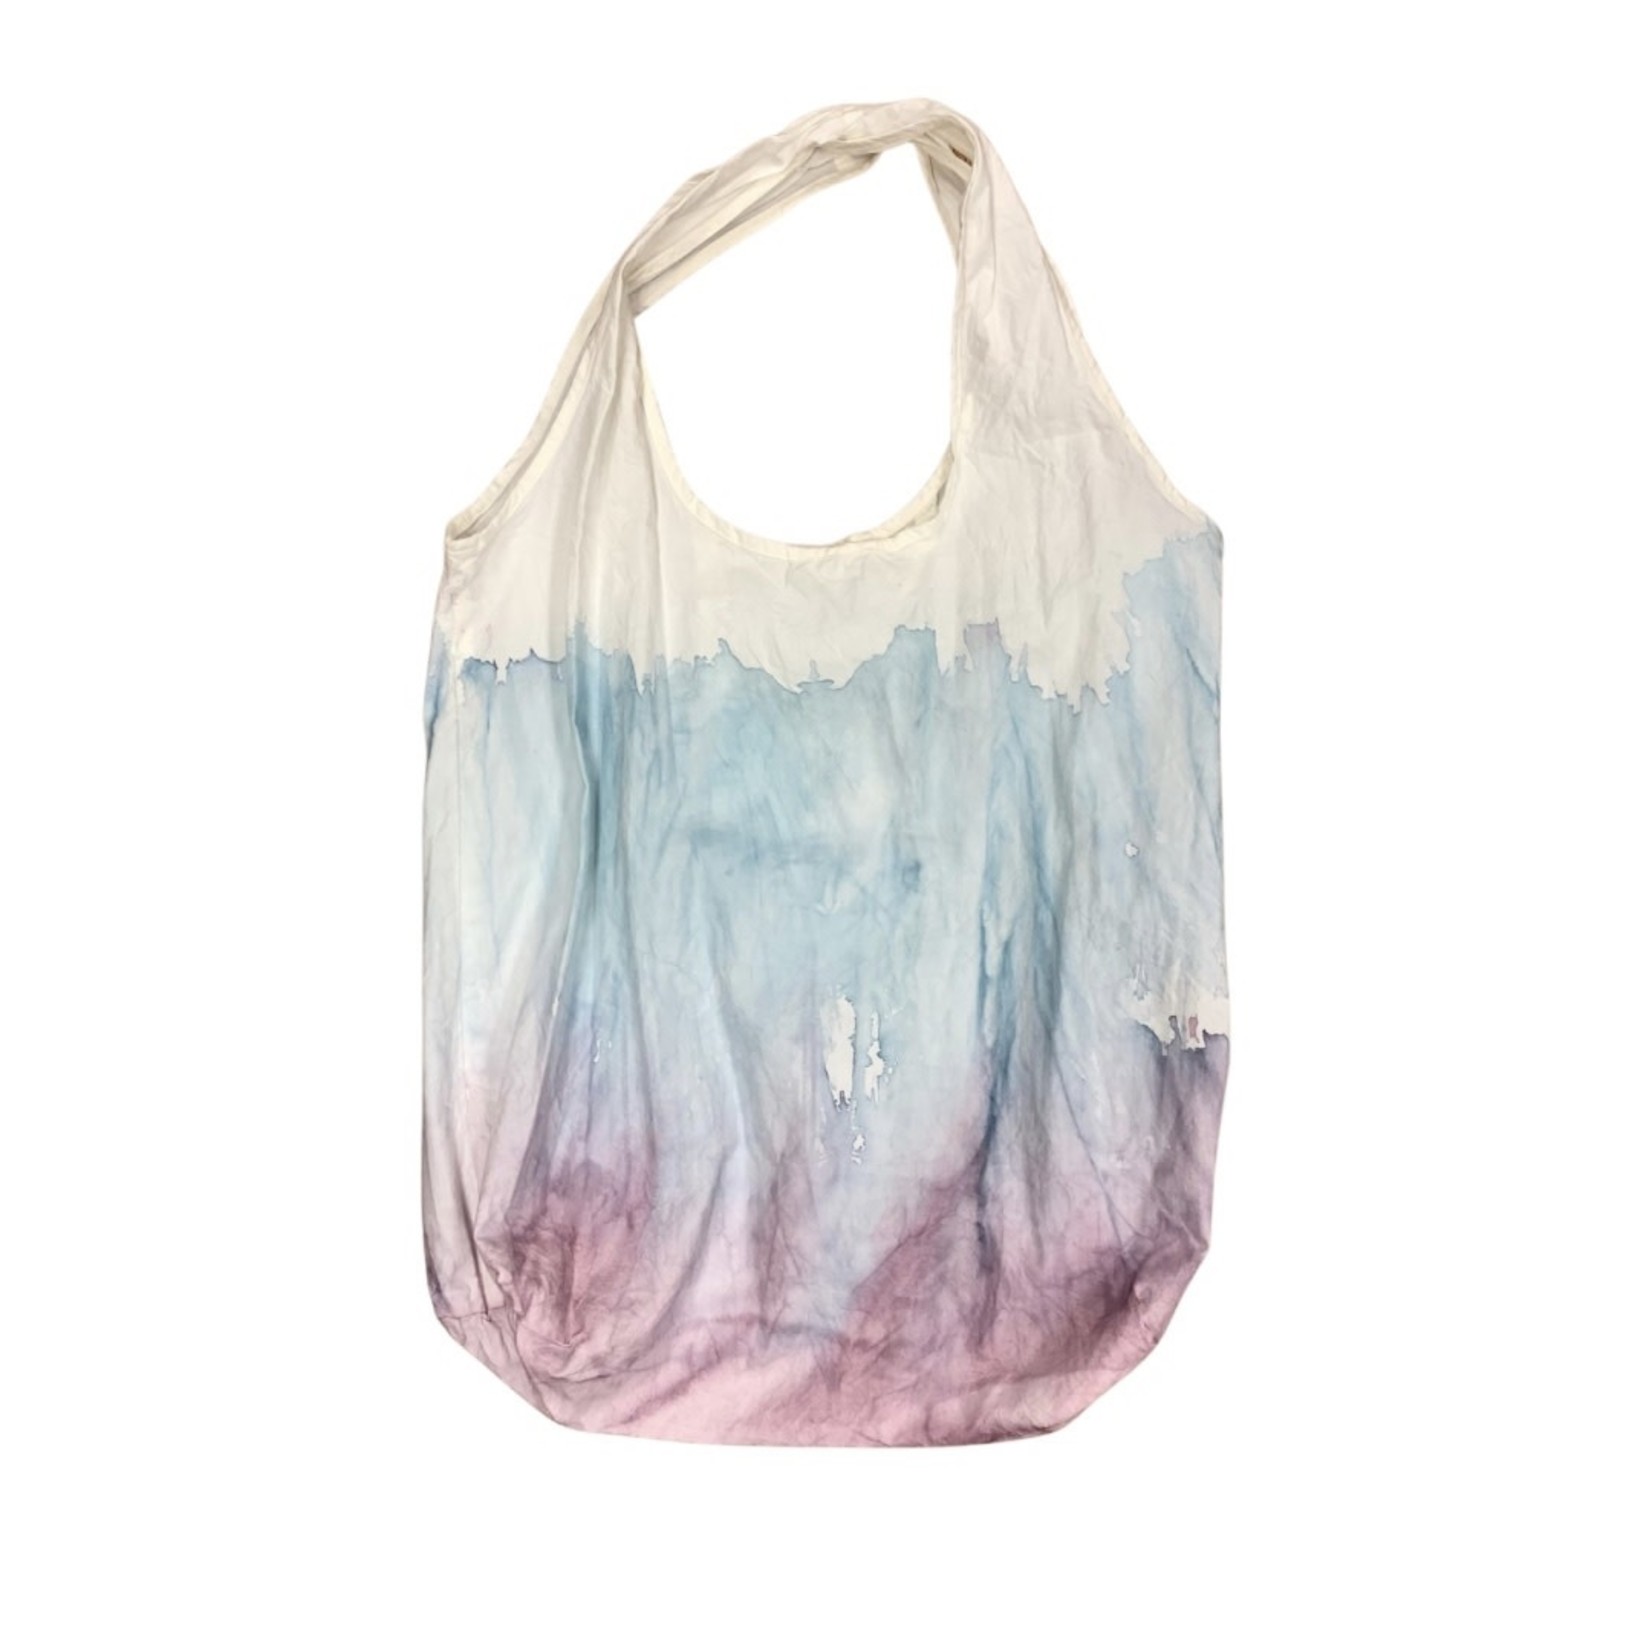 Labelle Lifewear Tote Bag - Hand Dye Asst. One of a Kind